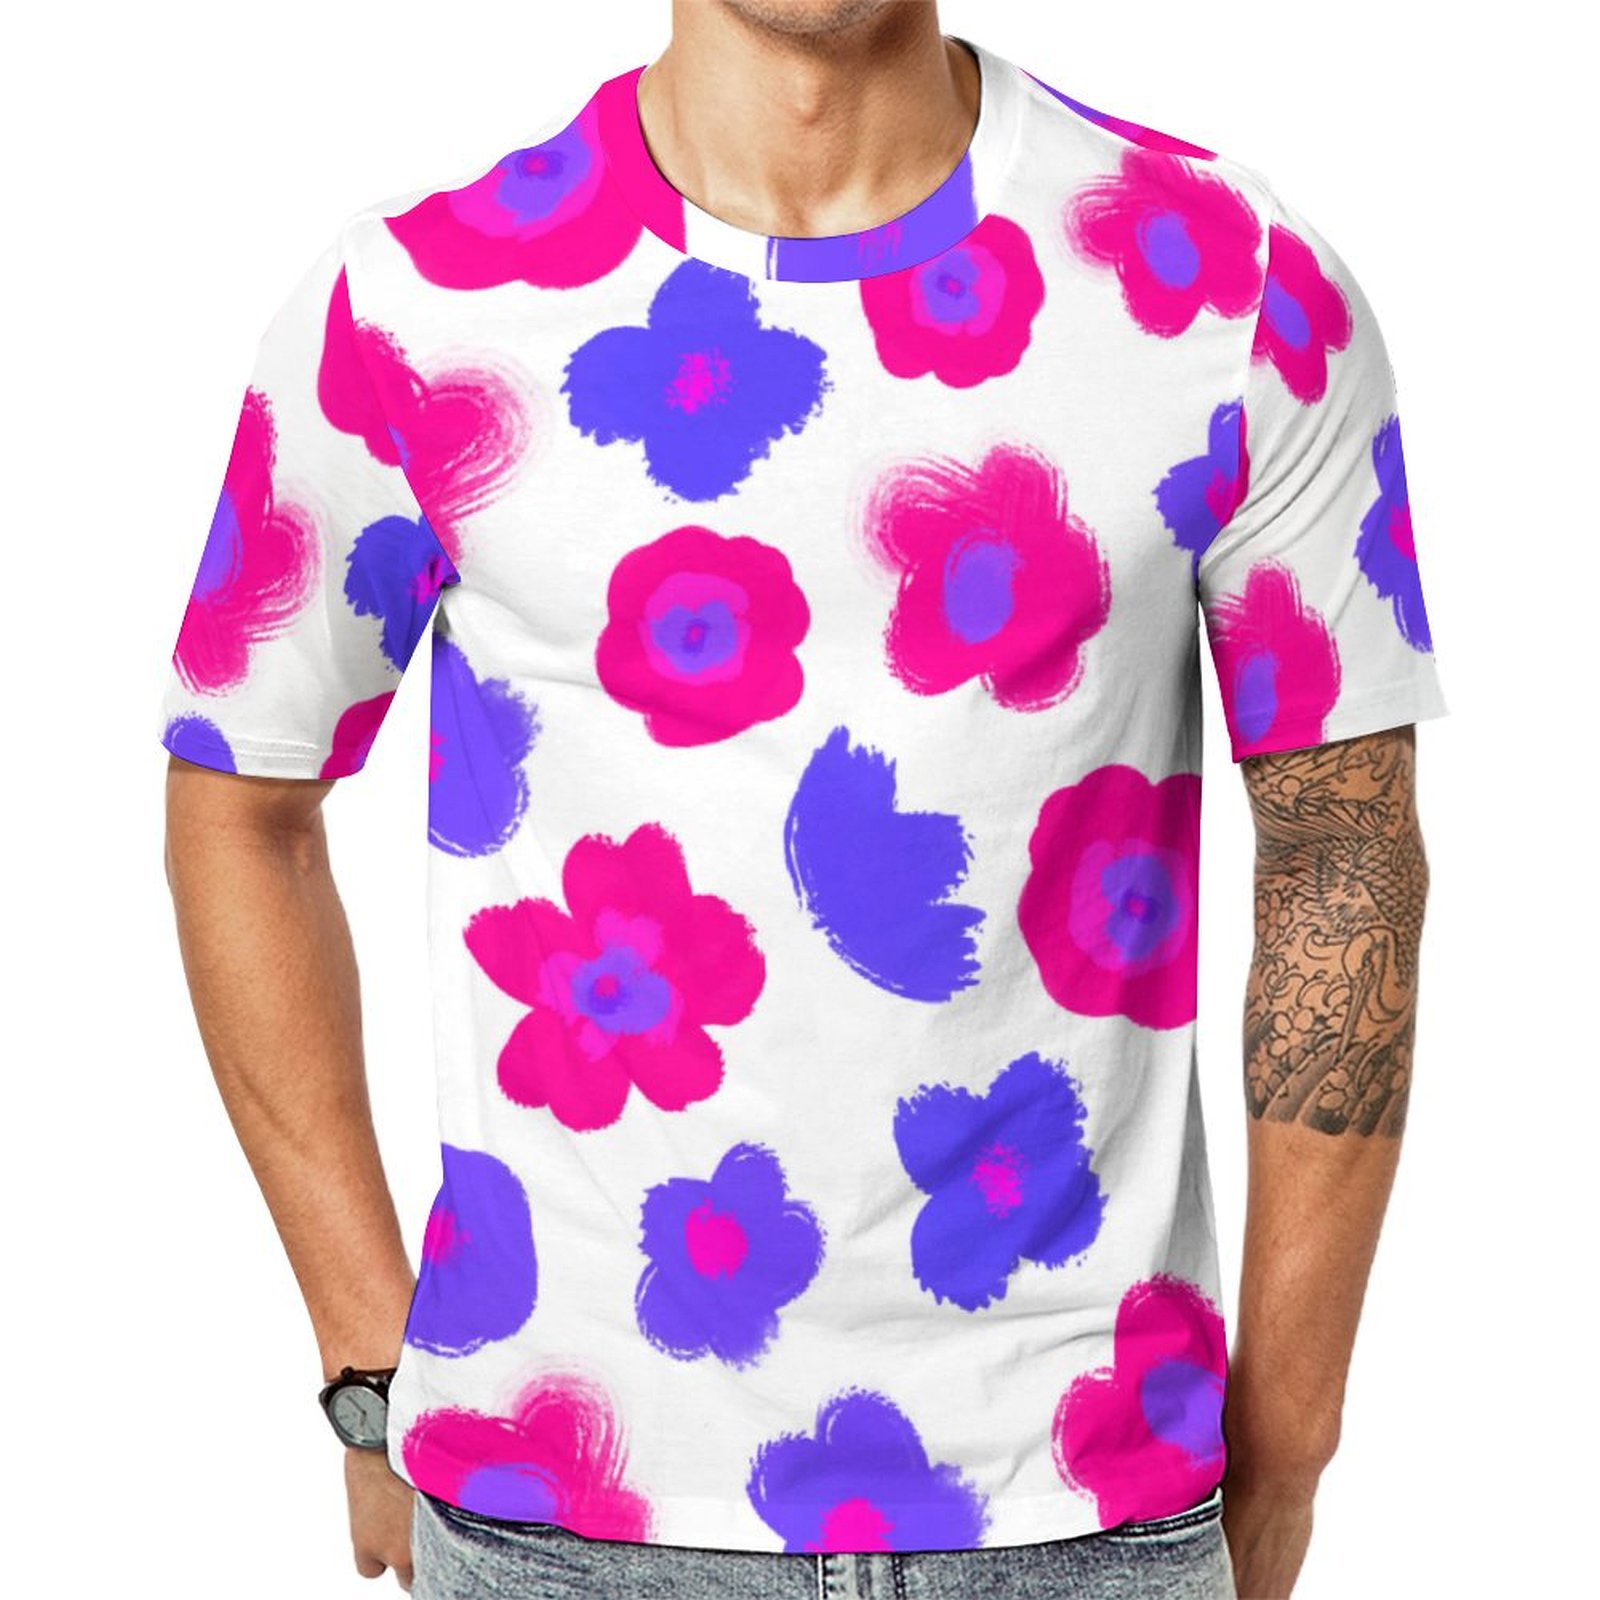 Floral Pink Purple Short Sleeve Print Unisex Tshirt Summer Casual Tees for Men and Women Coolcoshirts